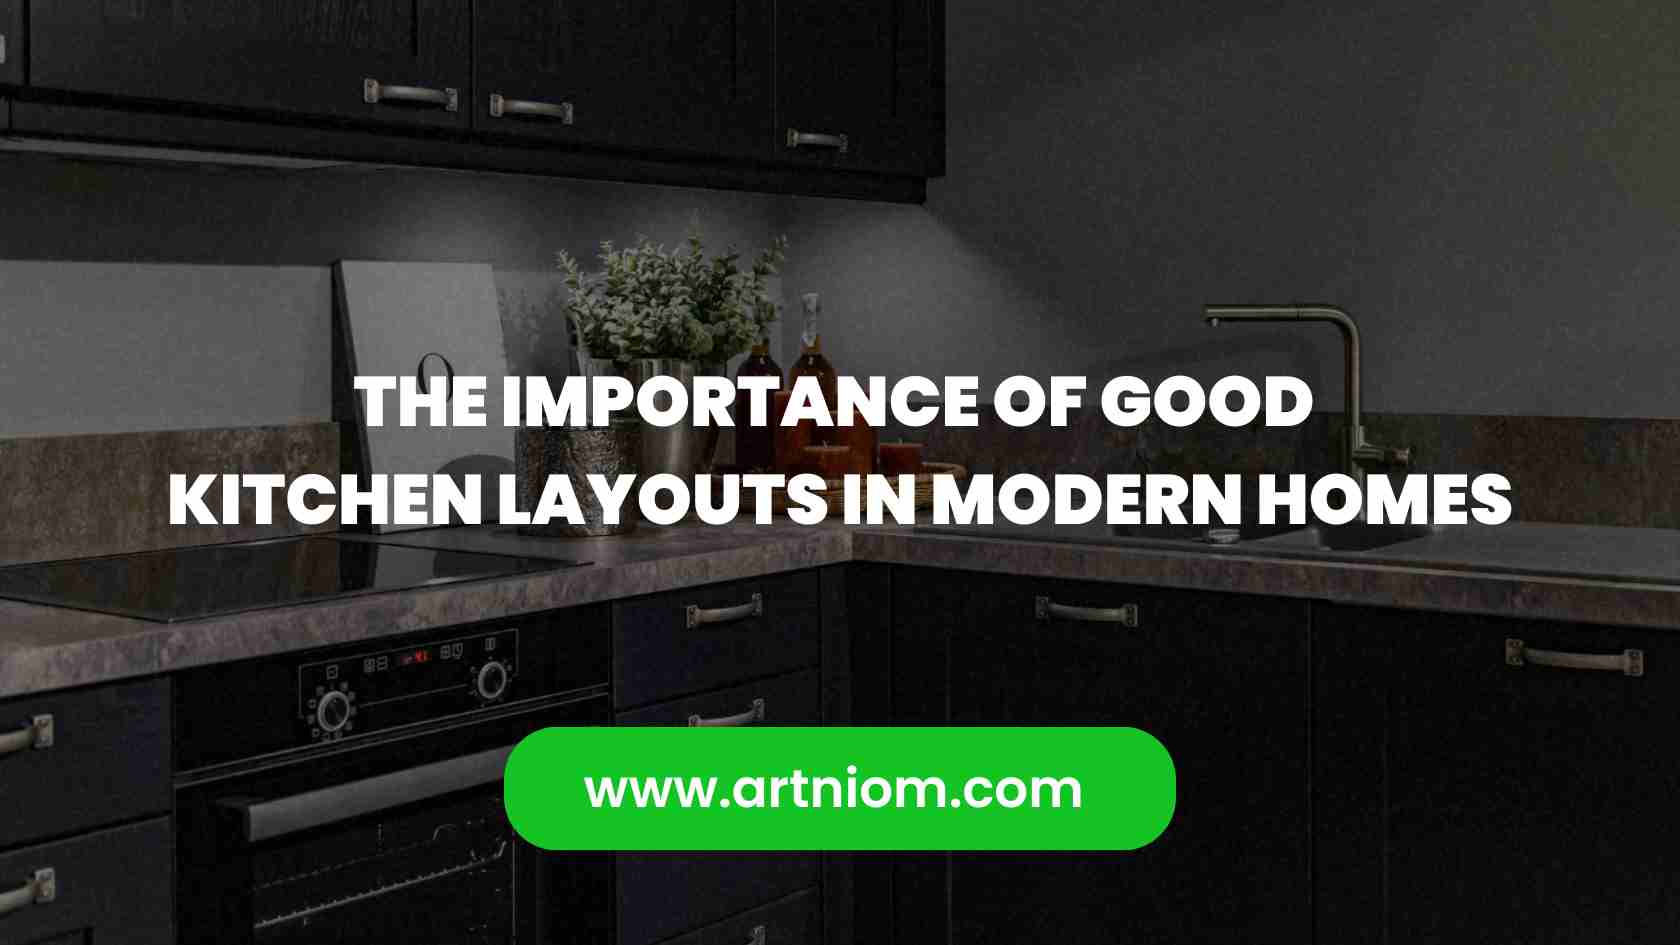 You are currently viewing The Importance of Good Kitchen Layouts in Modern Homes